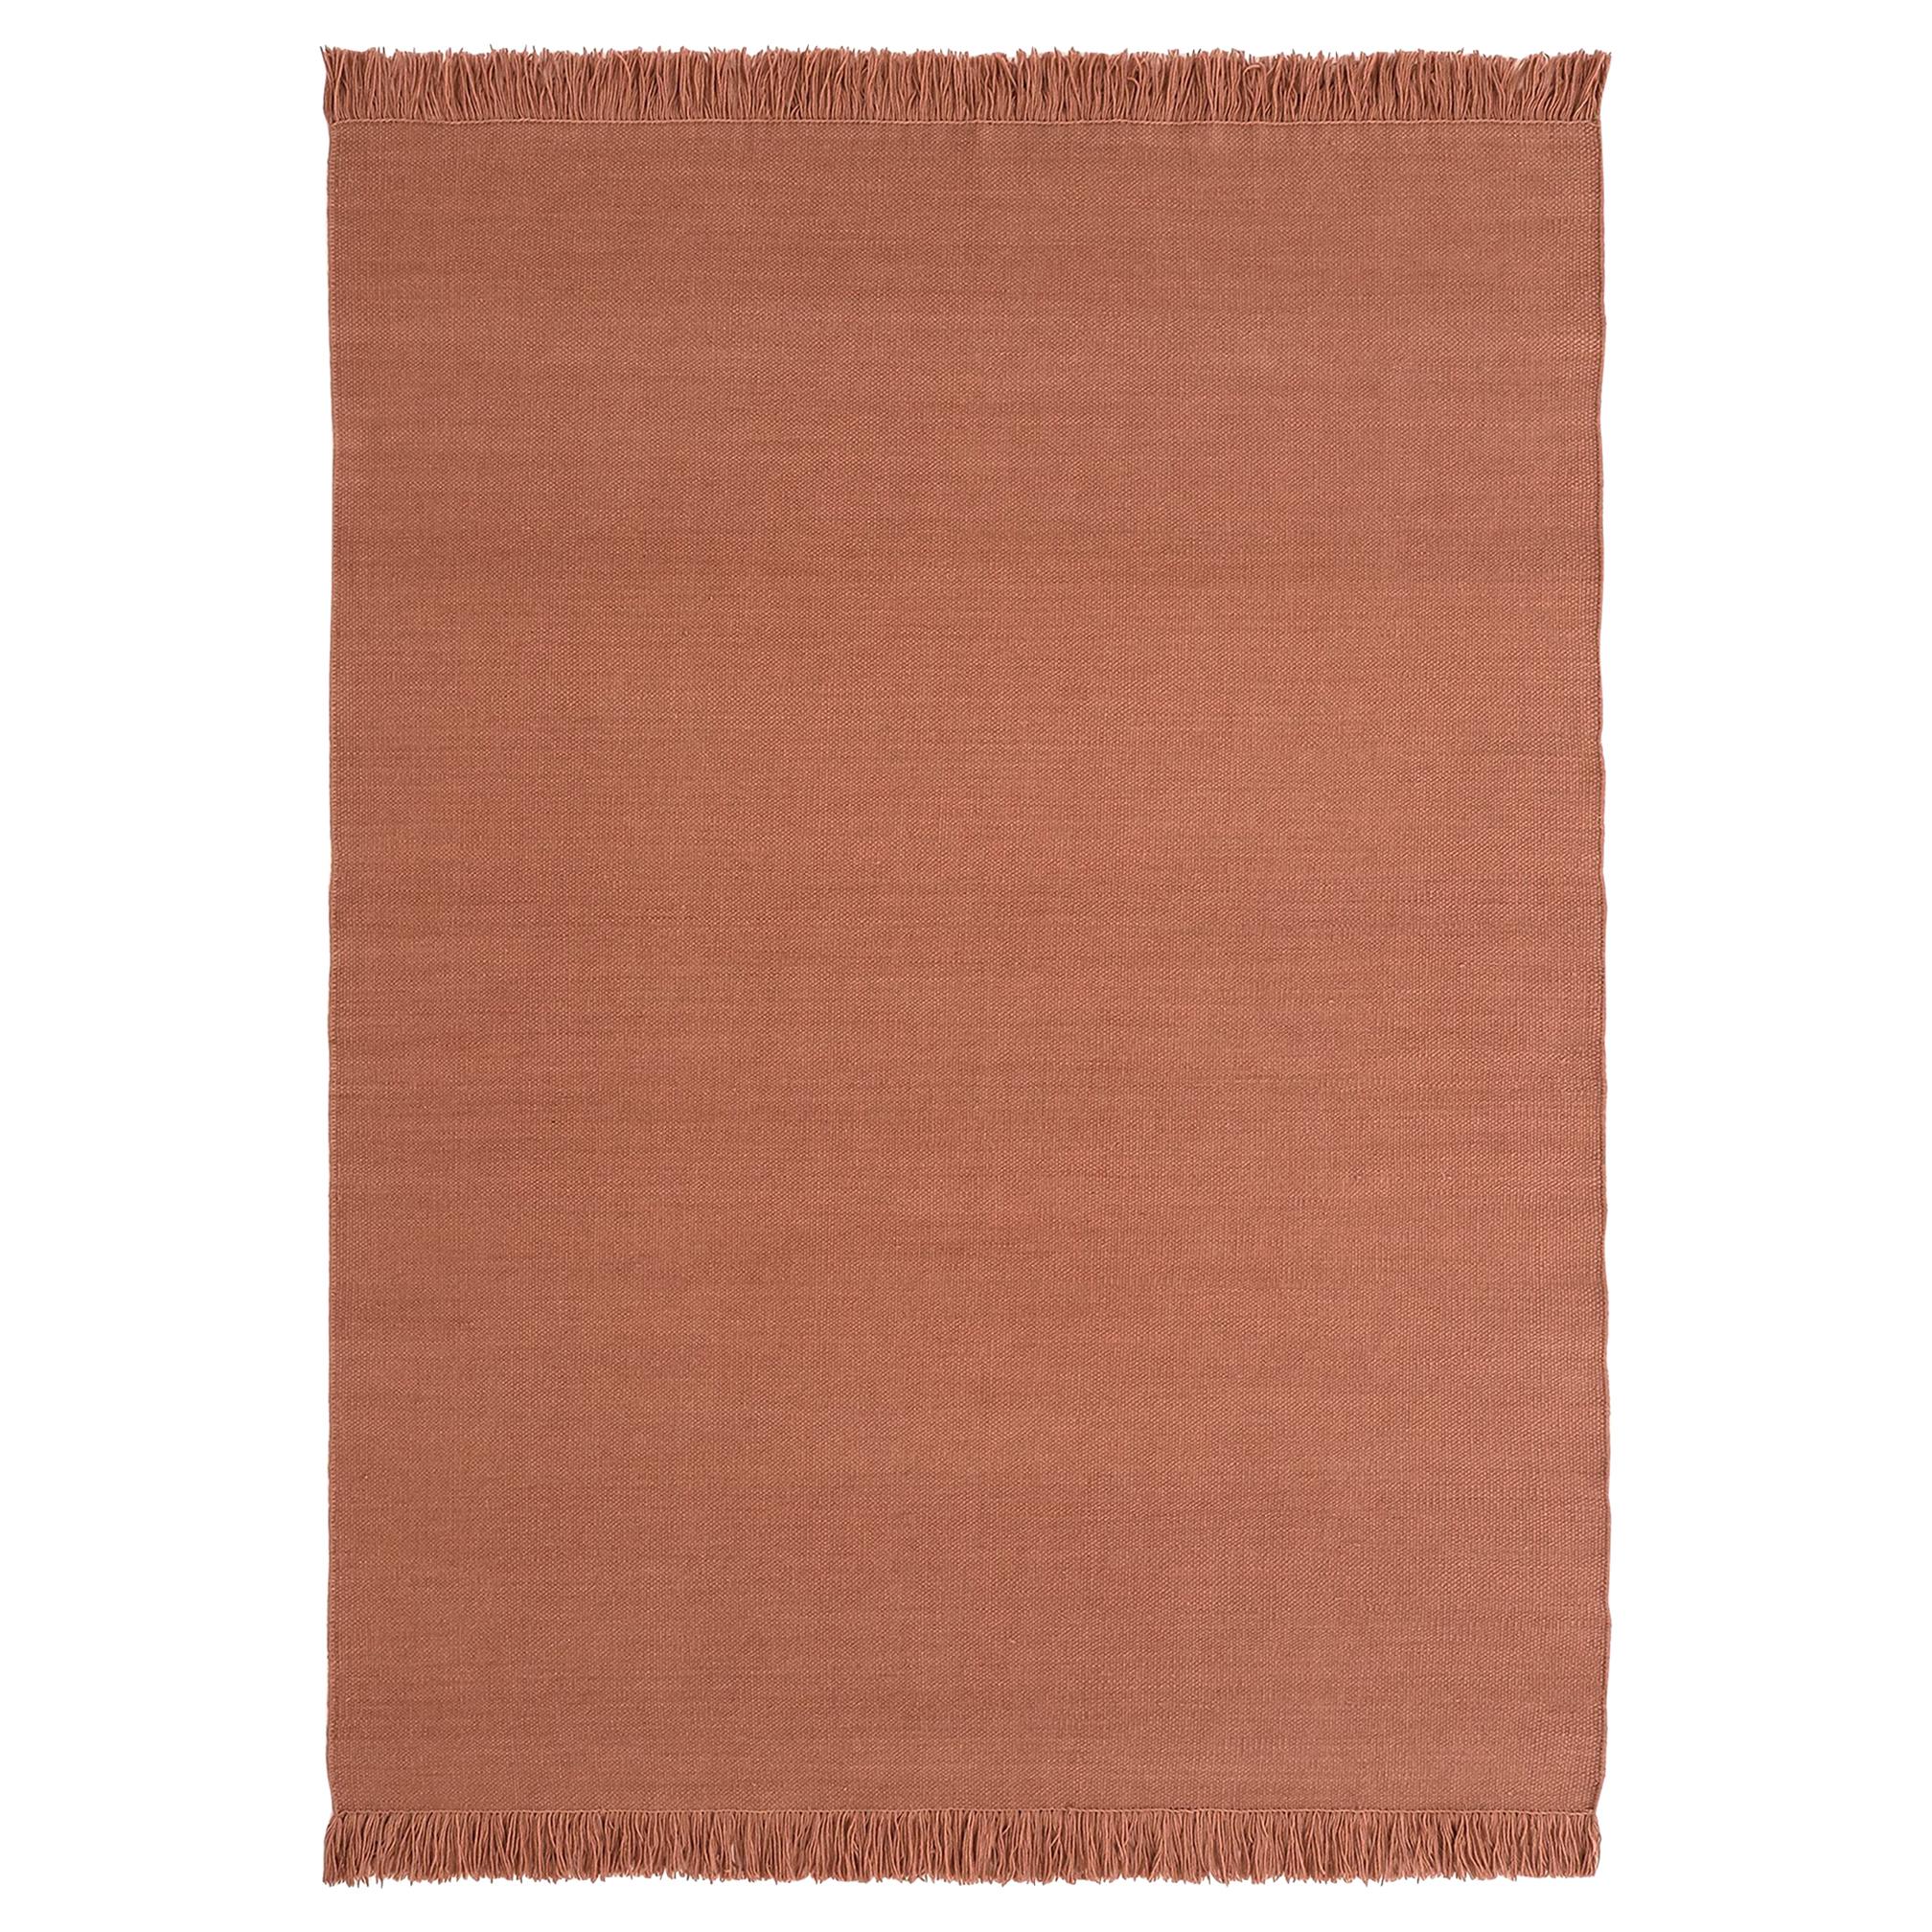 NEW - Colors Blush Dhurrie Standard Natural Wool Rug by Nani Marquina